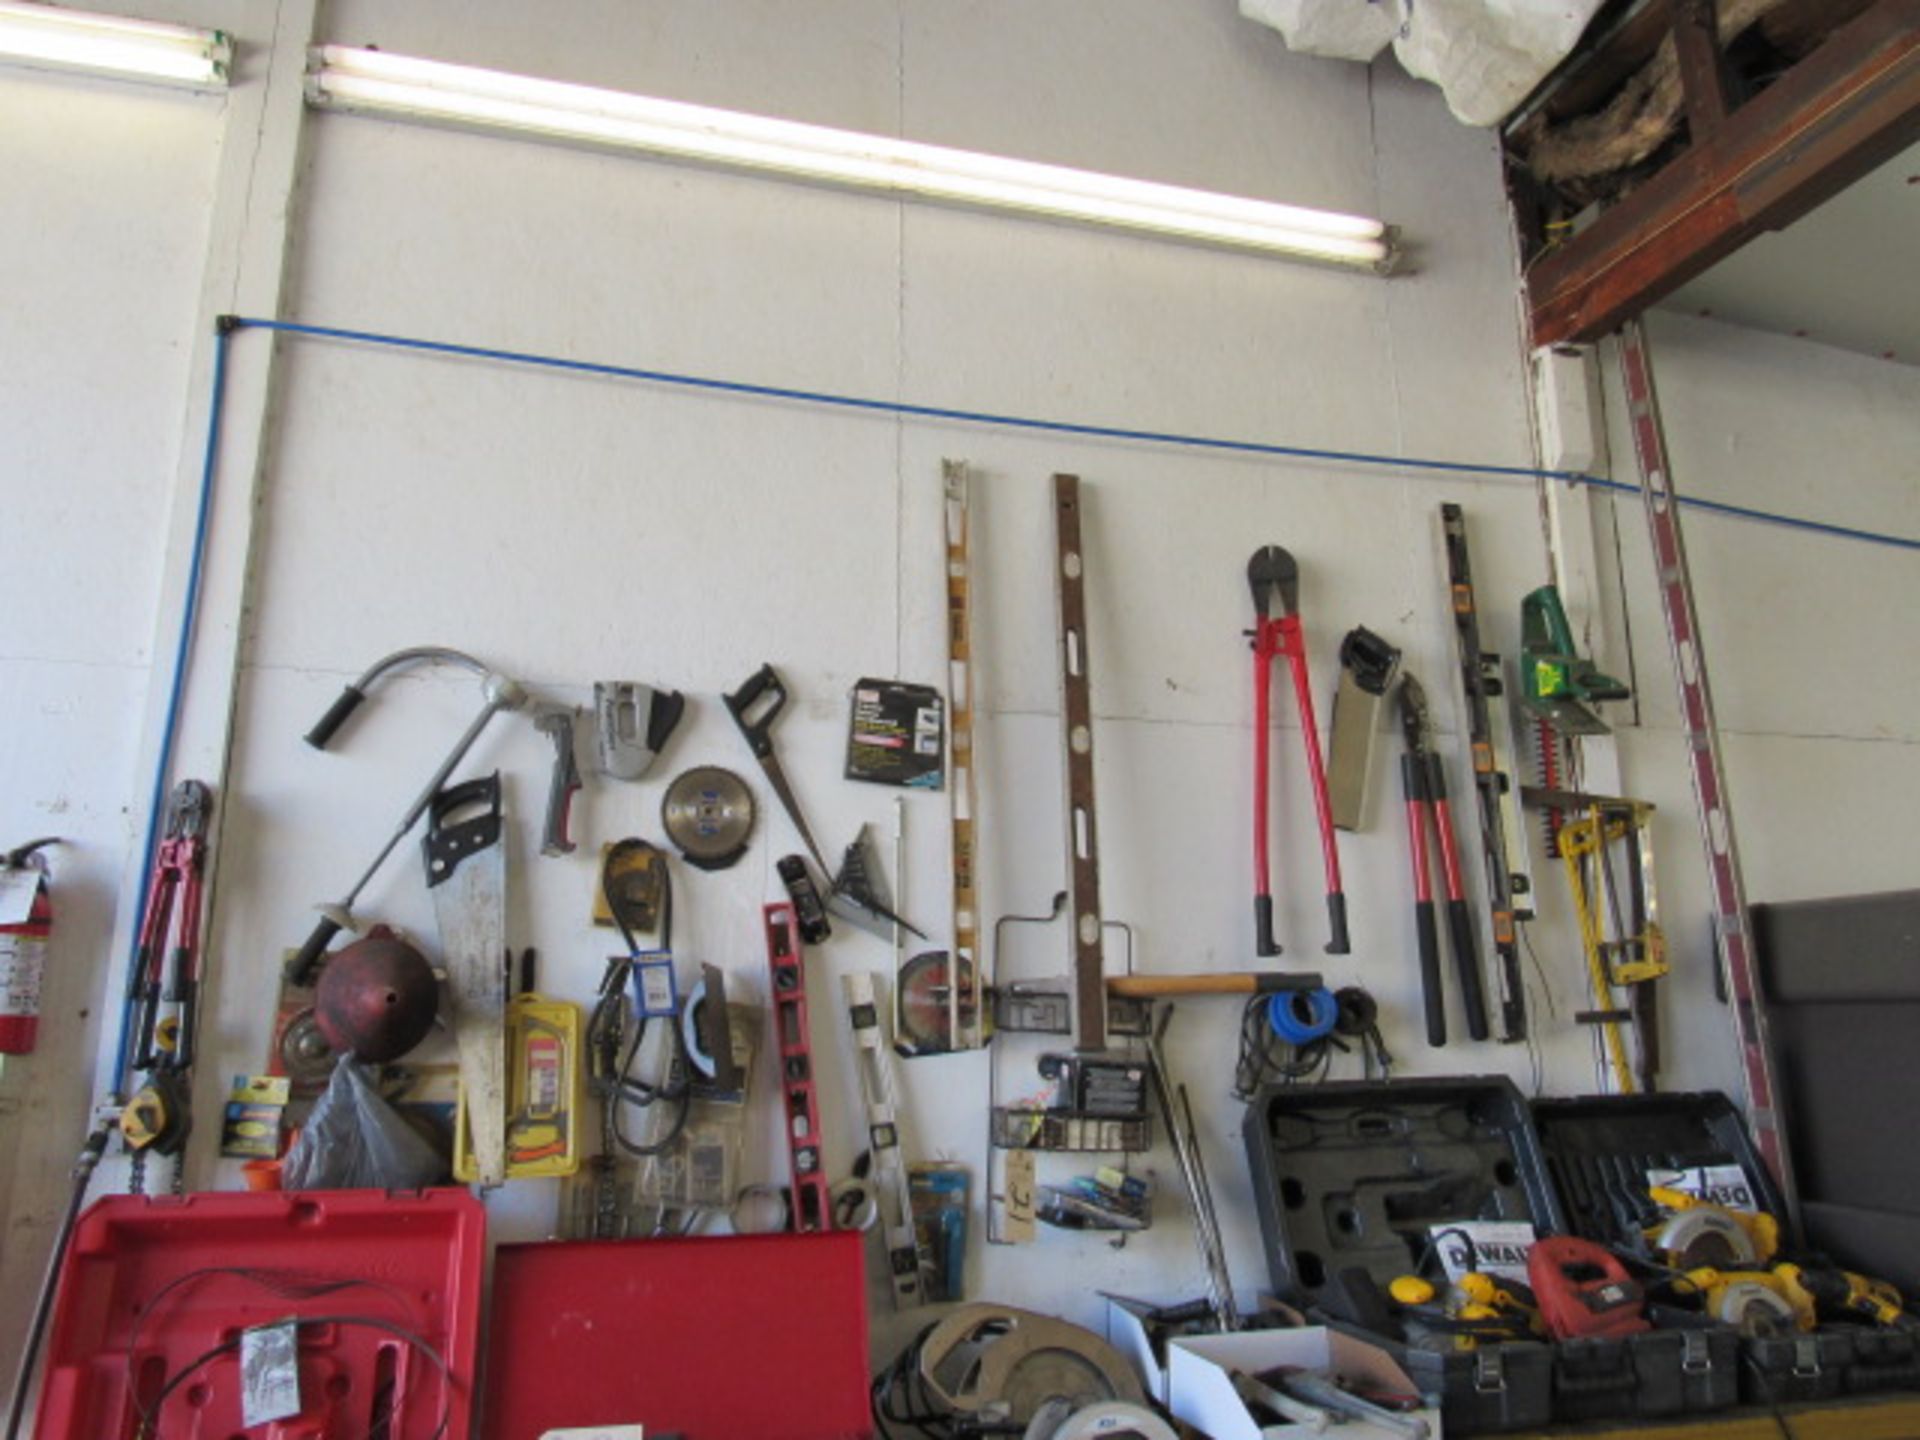 Shop Tools on Wall: Including Saws, Crimpers, Levels